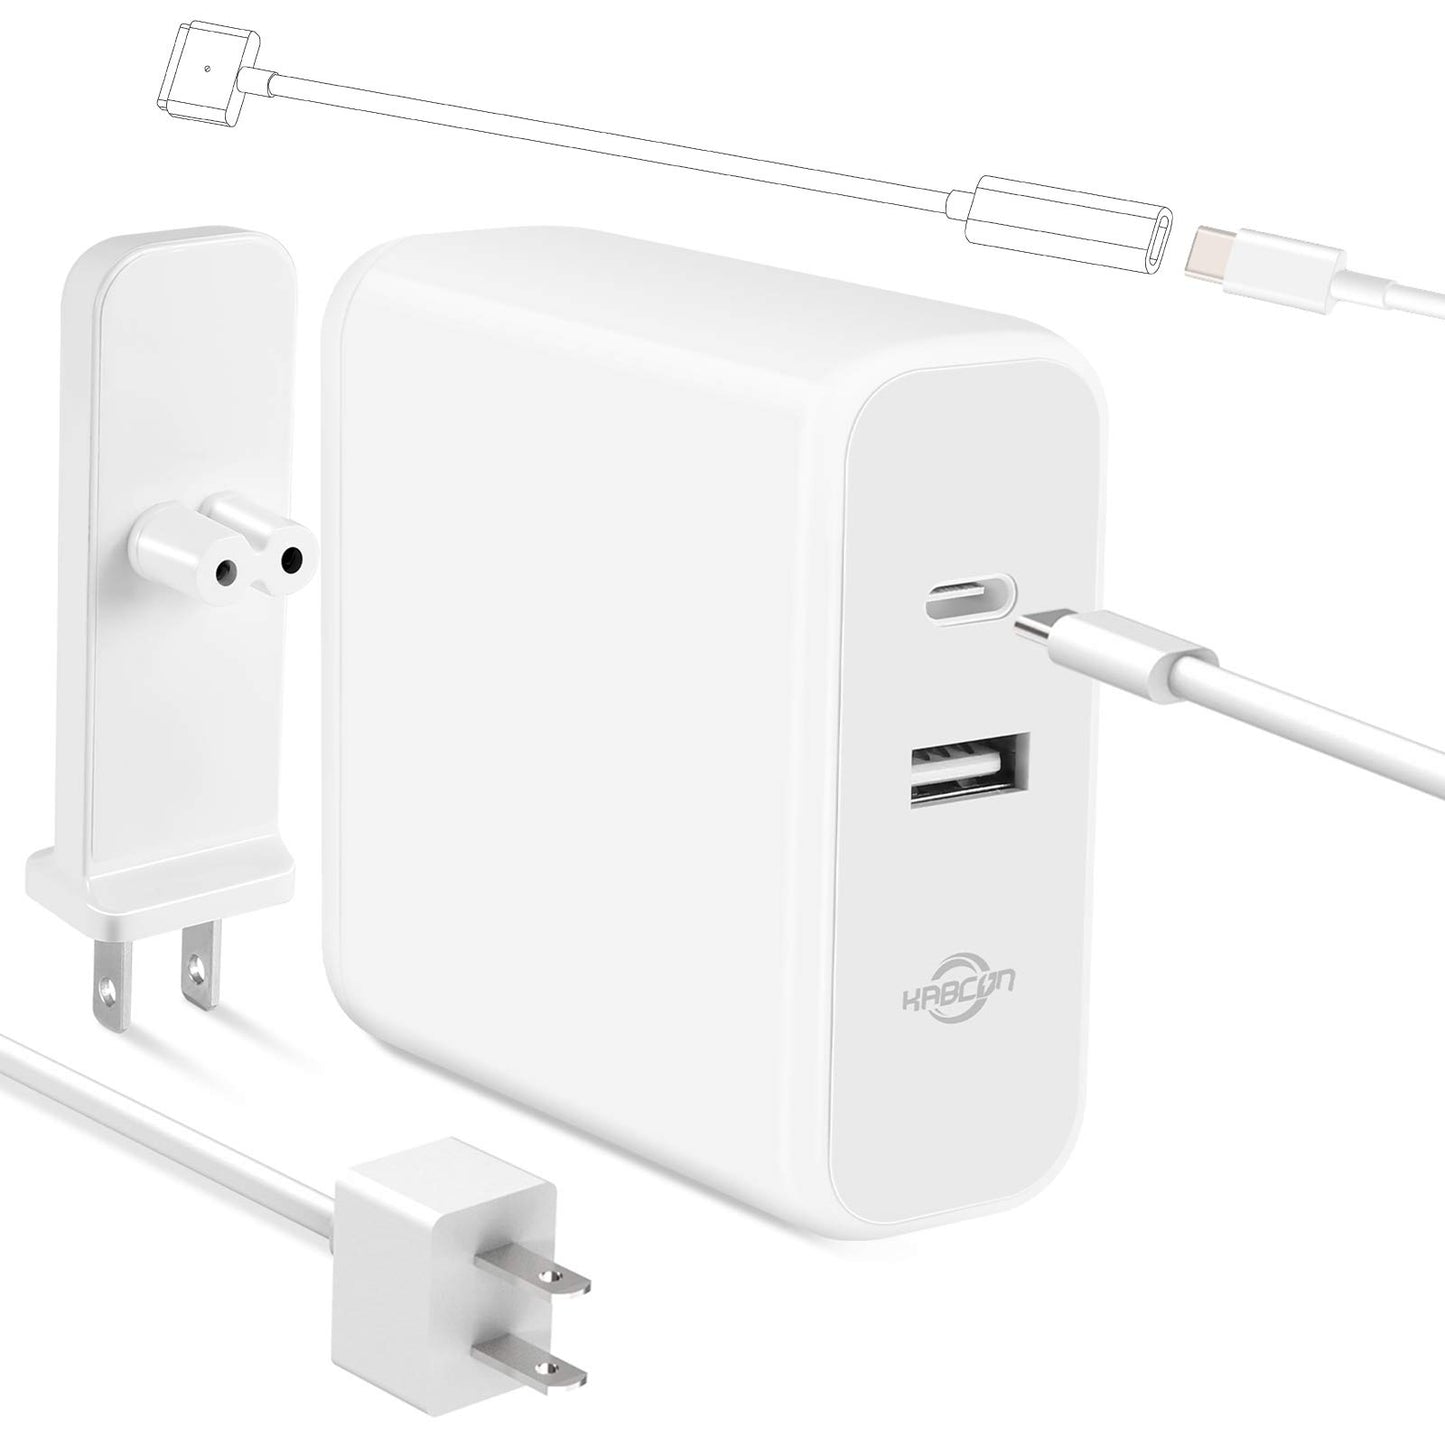 [US Stock] Mac Book Charger Mac Book Air Charger, Type C 60W Power Adapter Charger